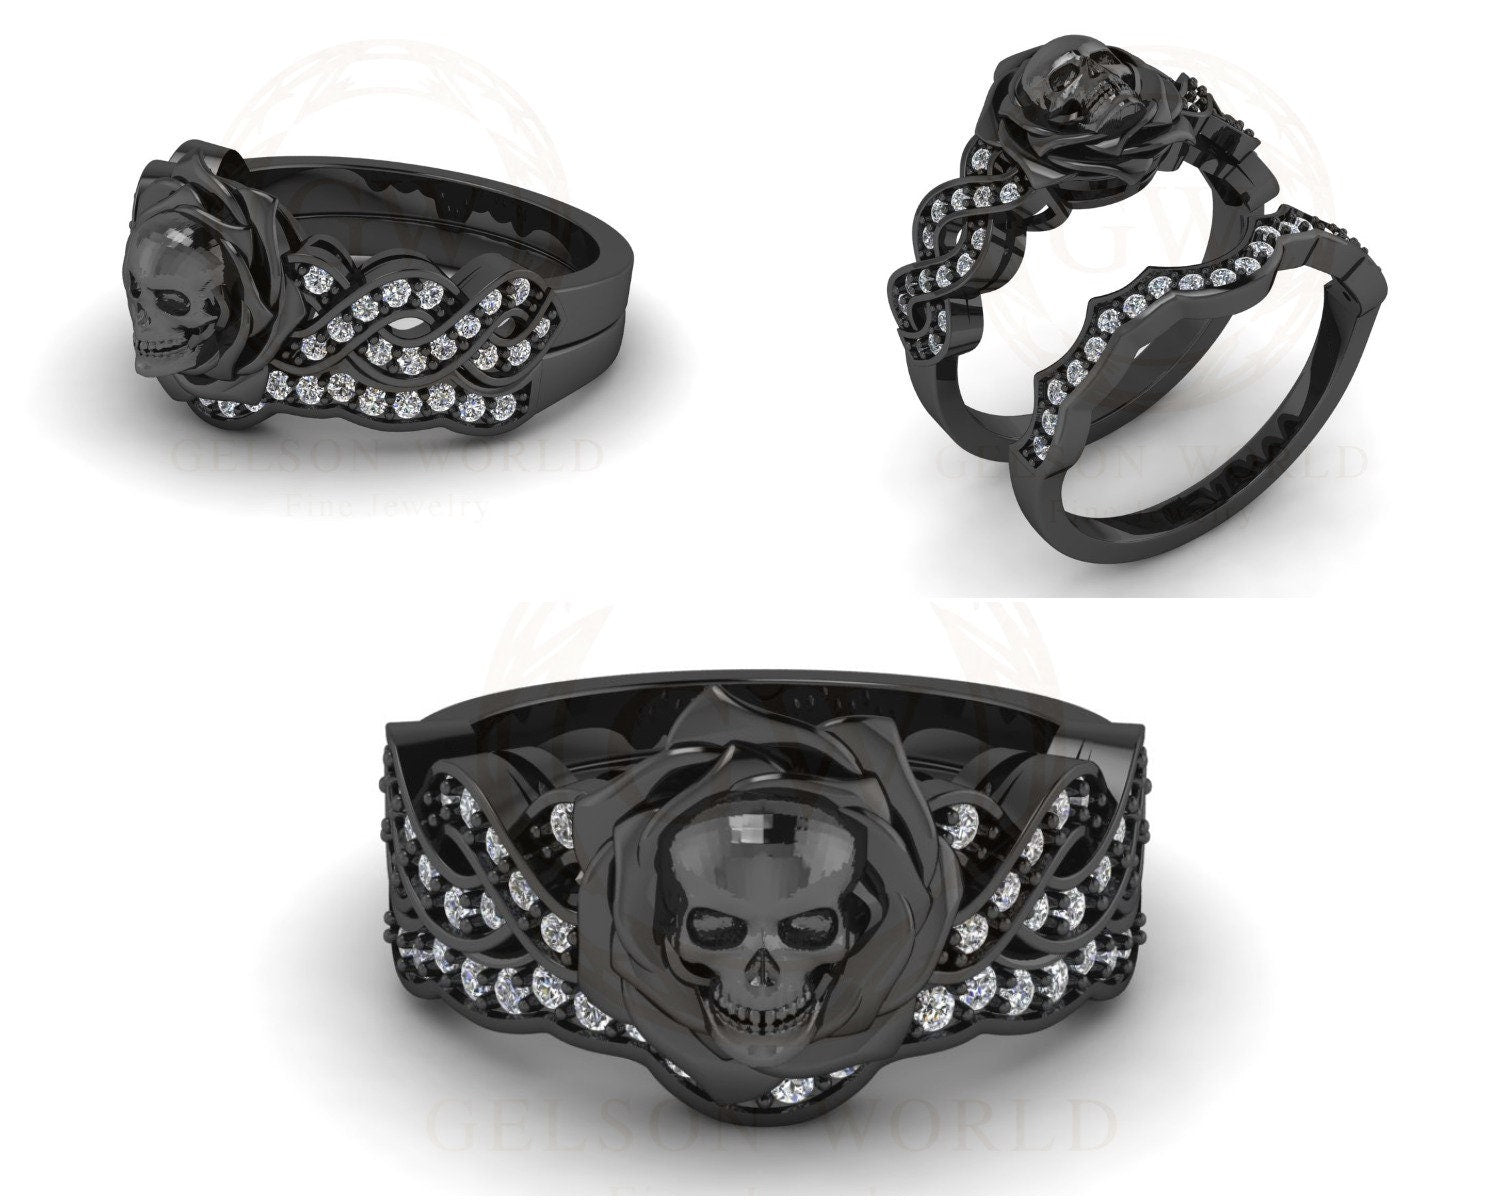 Skull Bridal Gothic Wedding Ring Sets, Rose Floral Engagement Ring, Criss Cross Nature Inspired Design, White Round CZ, Black Rhodium Plated